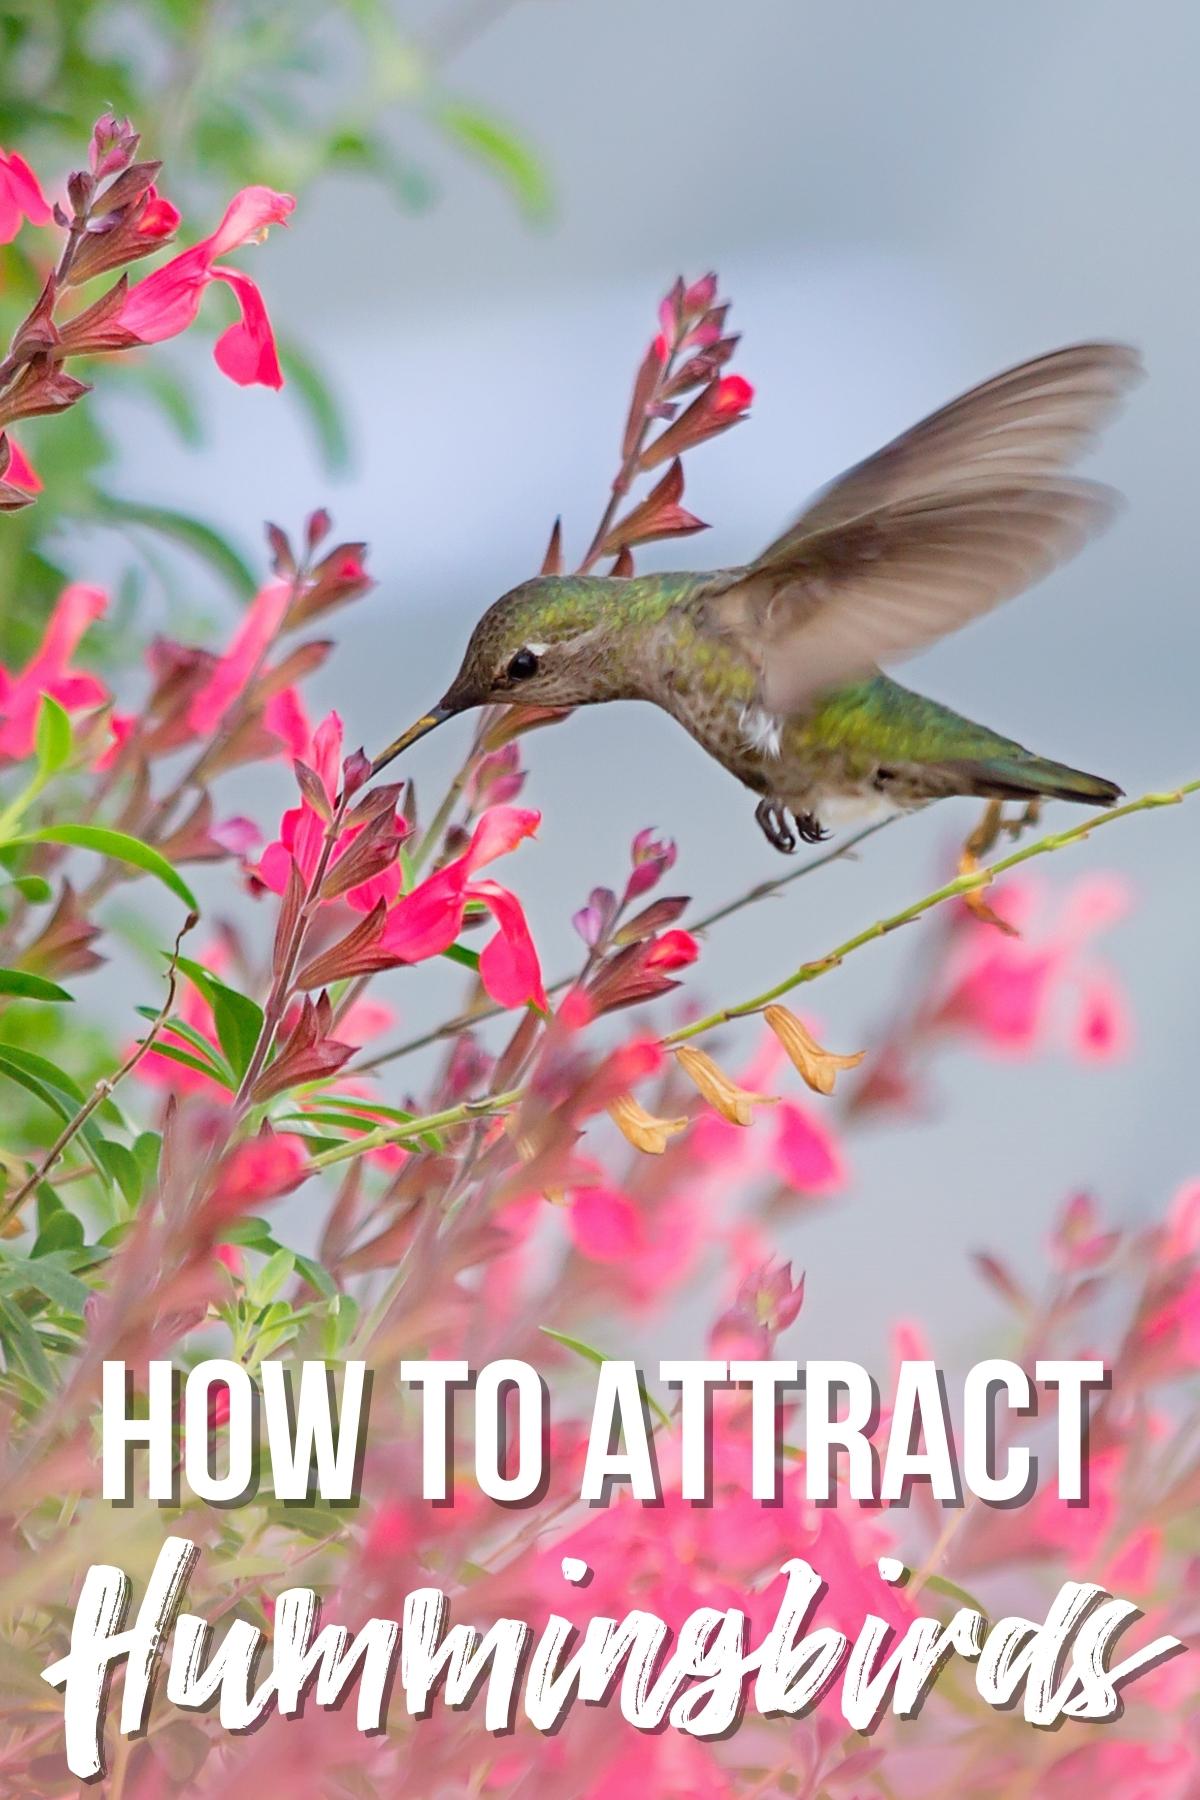 How to attract hummingbirds to your garden